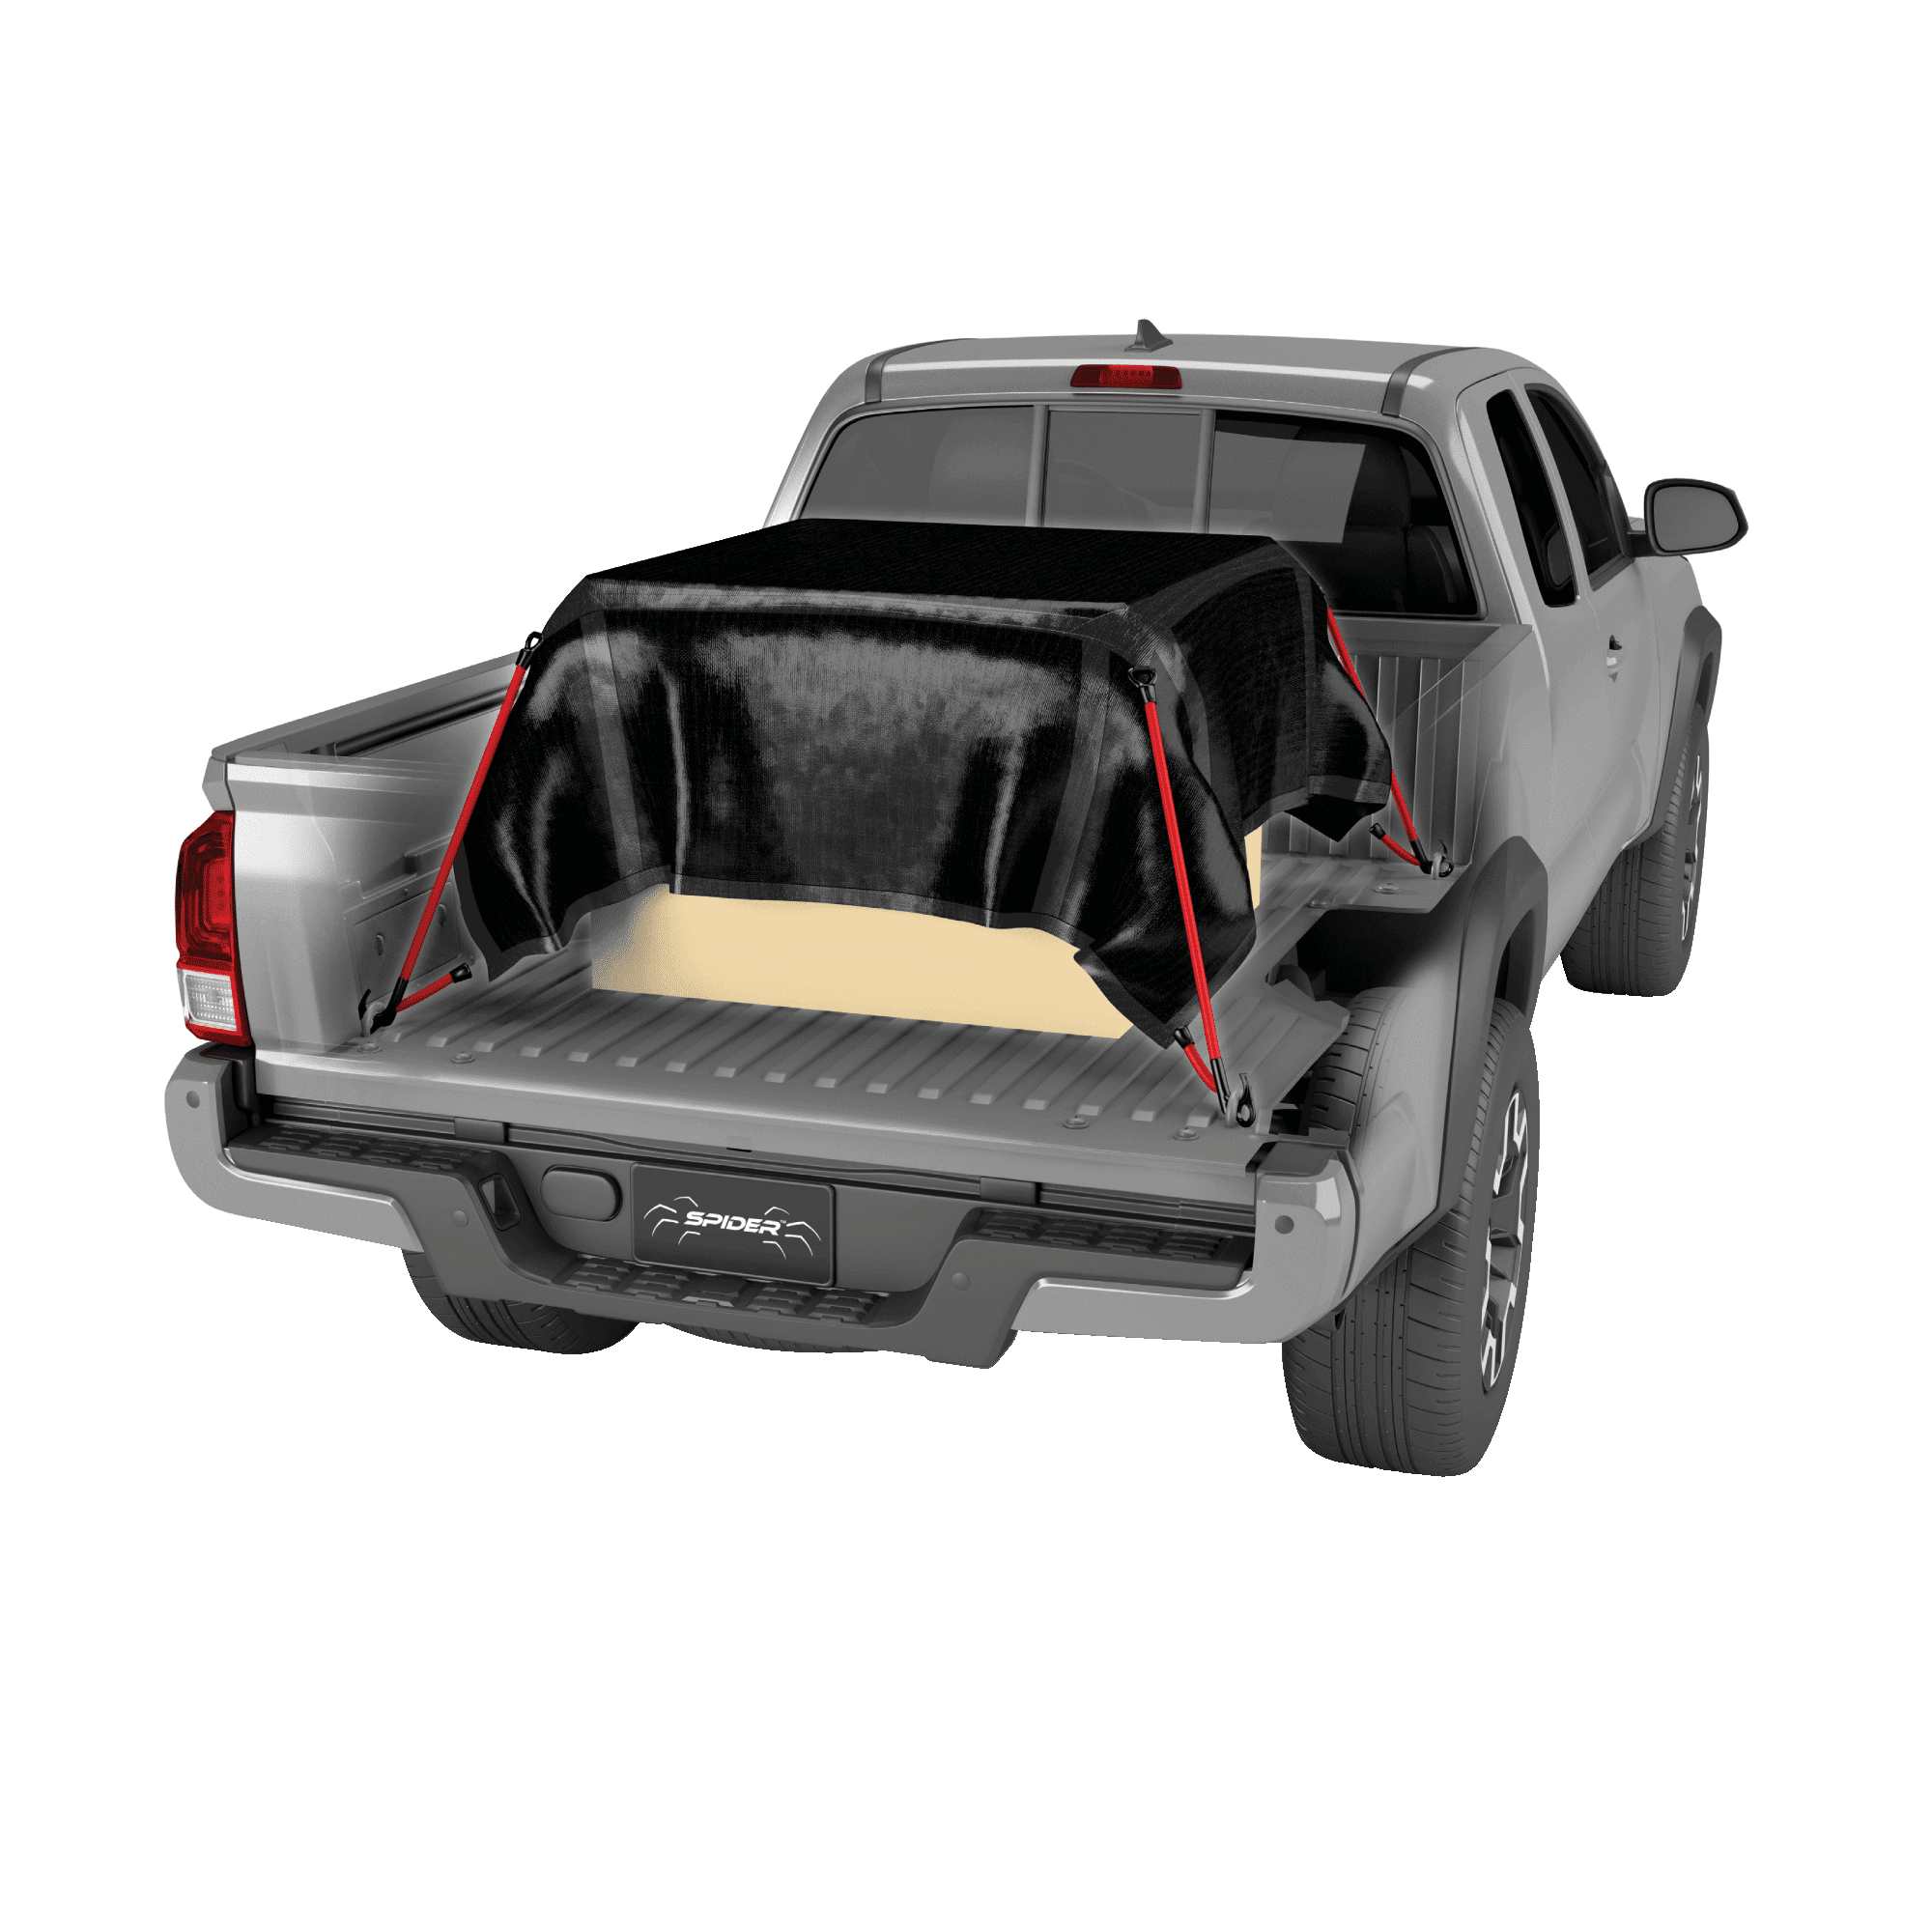 4 Built-in Bungee Cords for Standard Bed Pickup : 8.5' x 7.5' STTM2623B-1 for Standard Bed Pickup : 8.5 x 7.5 Cargo Net Alternative 4 Built-in Bungee Cords SPIDER Patented Mesh Heavy-Duty Truck Tarp with Patented Adjustable Hooks 